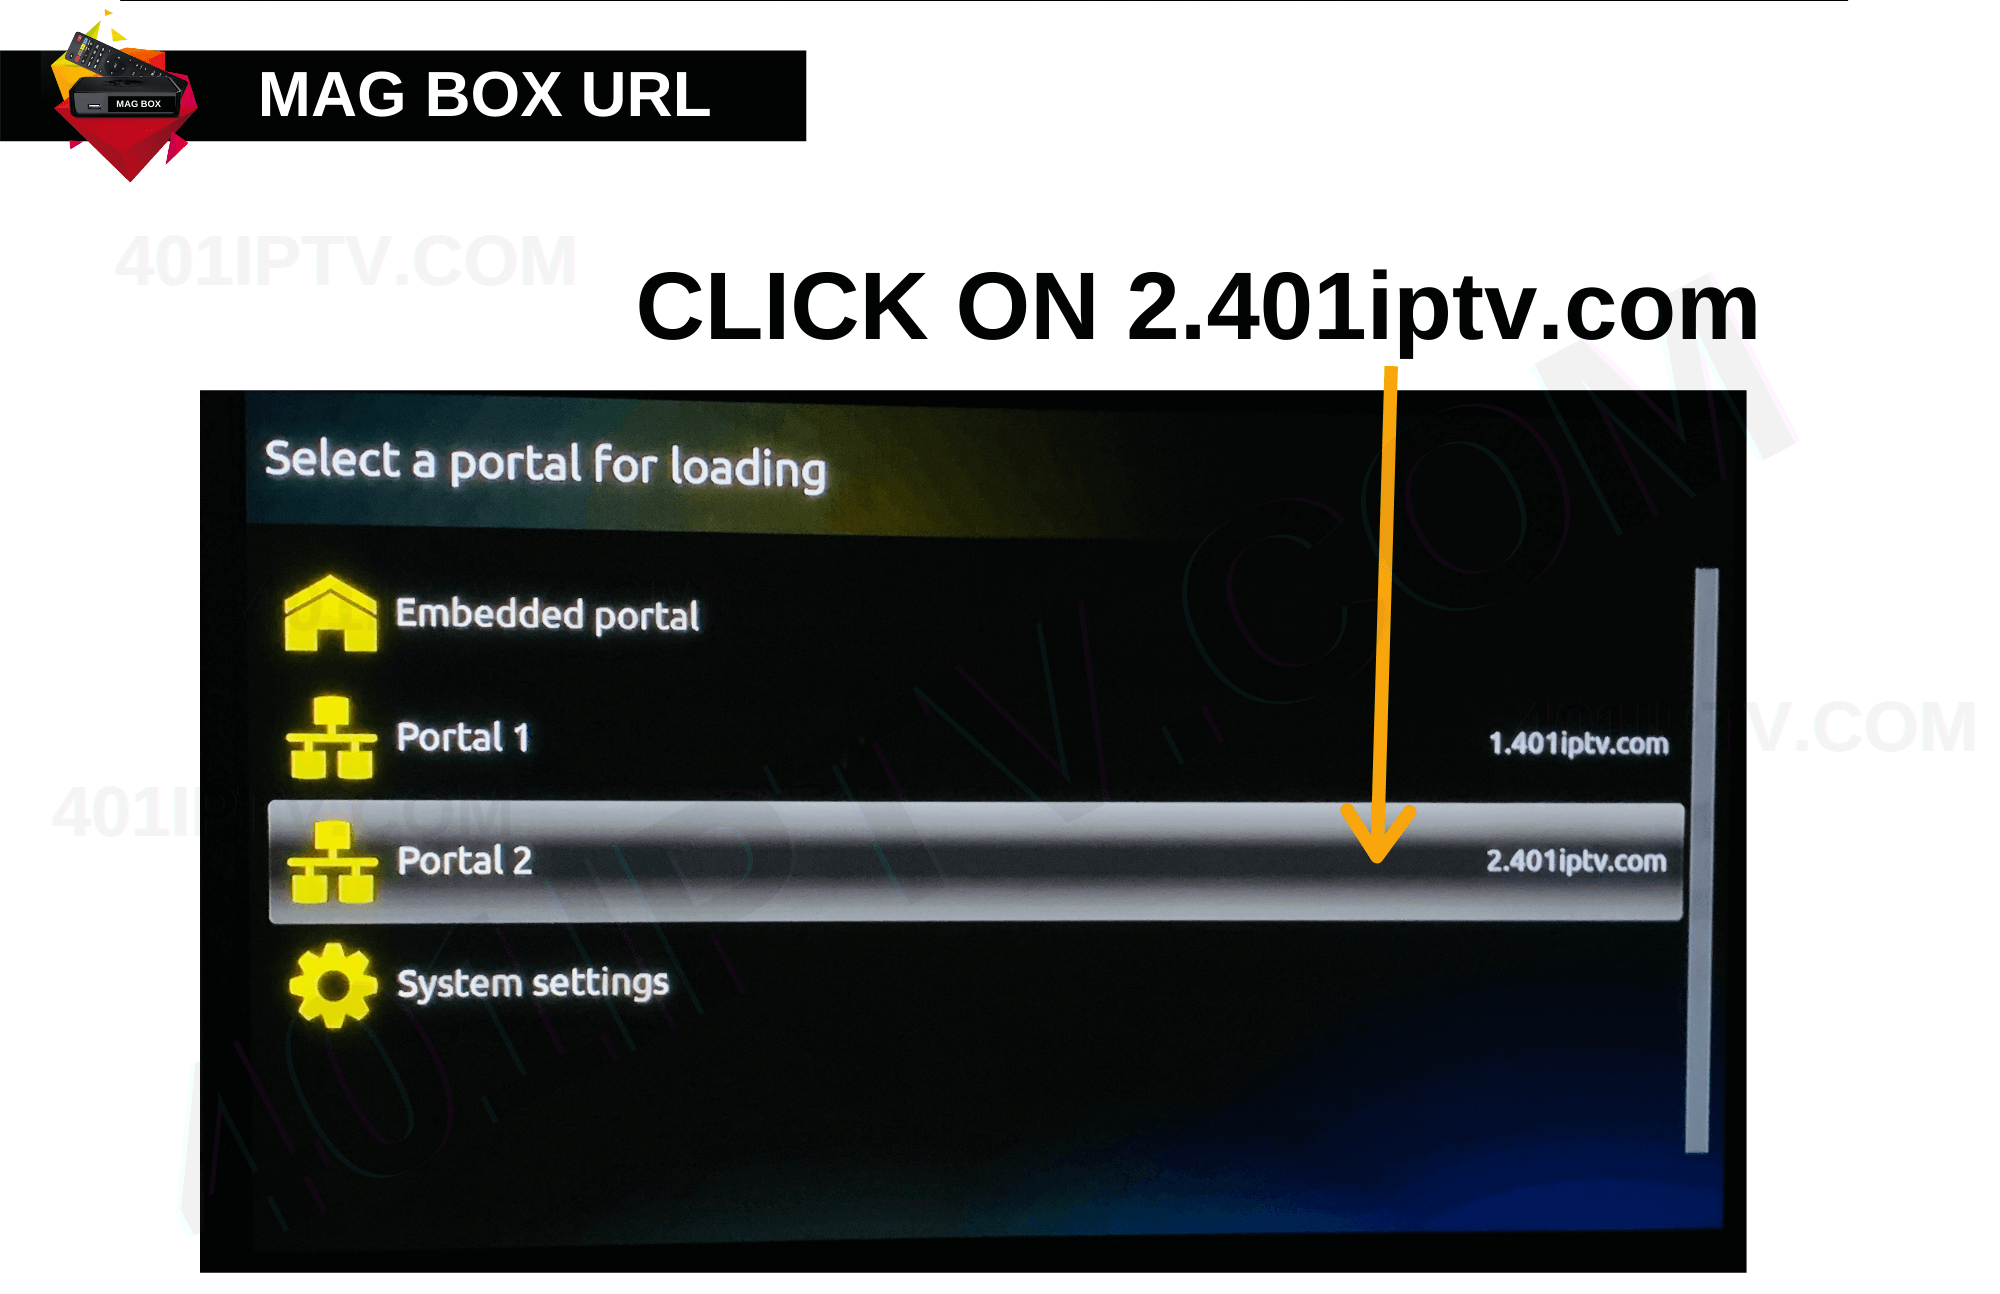 03 HOW TO SETUP MAG BOX CURRENT URL11